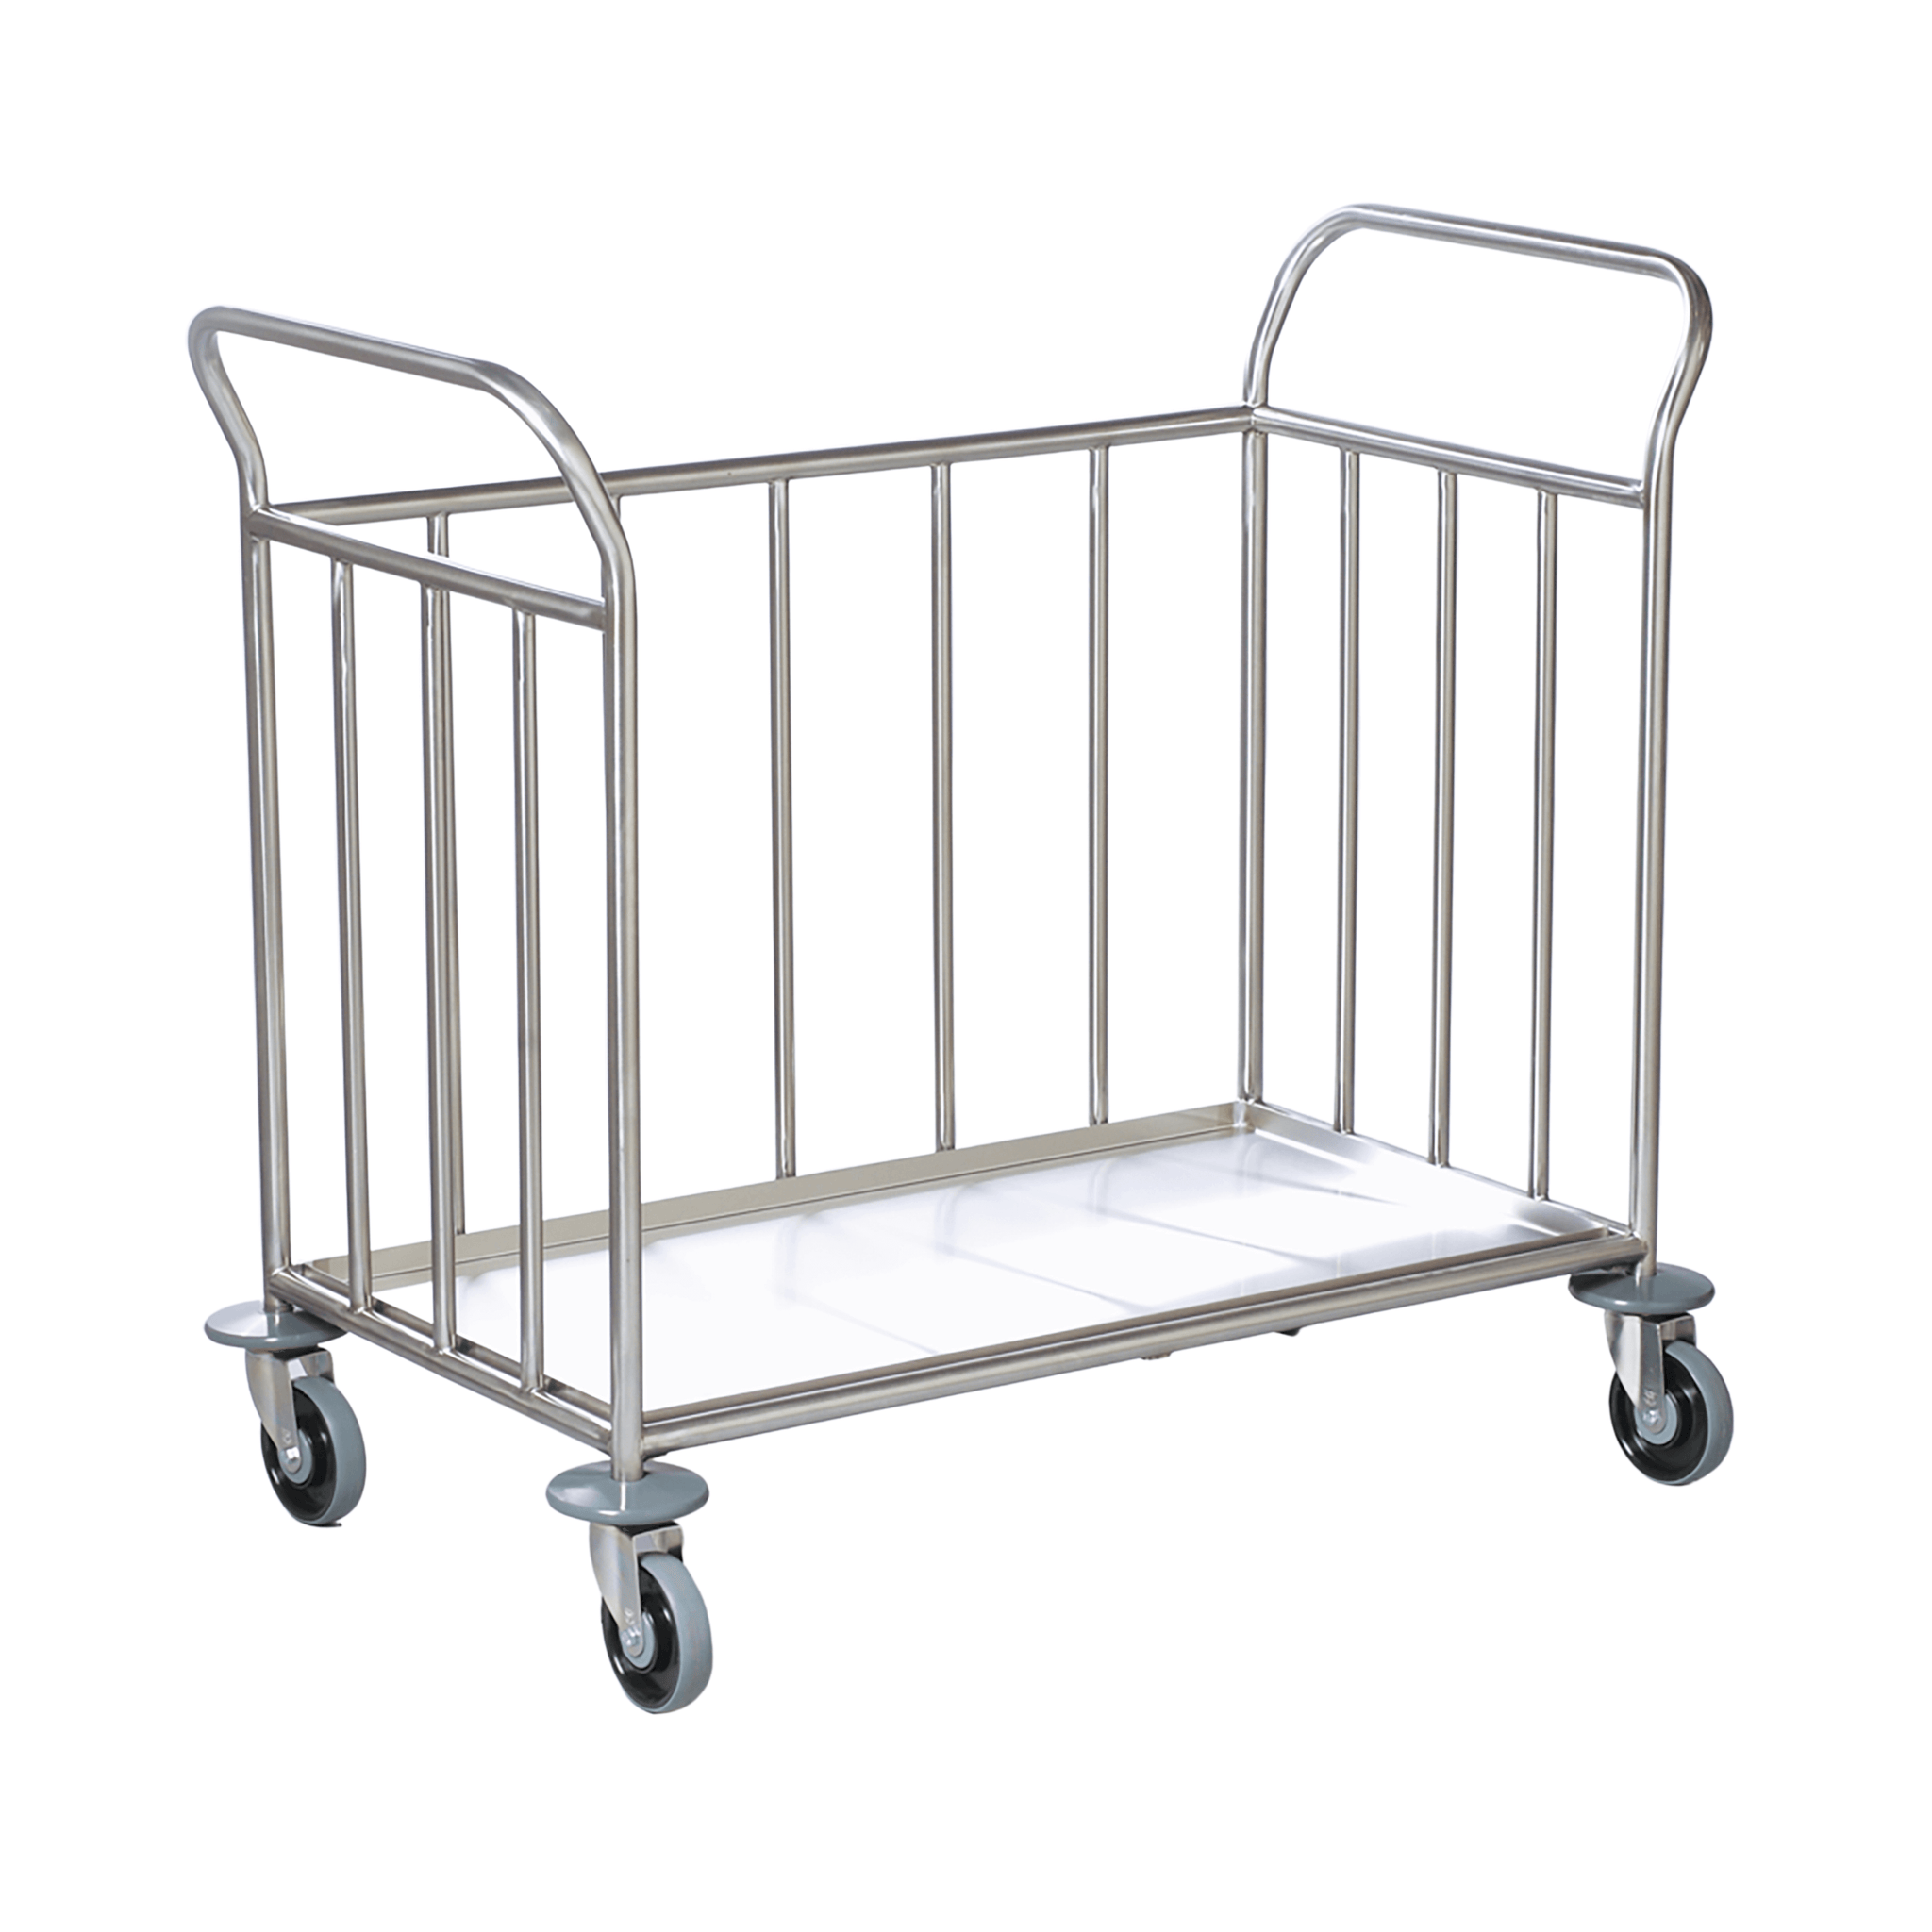 Bulk Collection Trolley- Stainless Steel